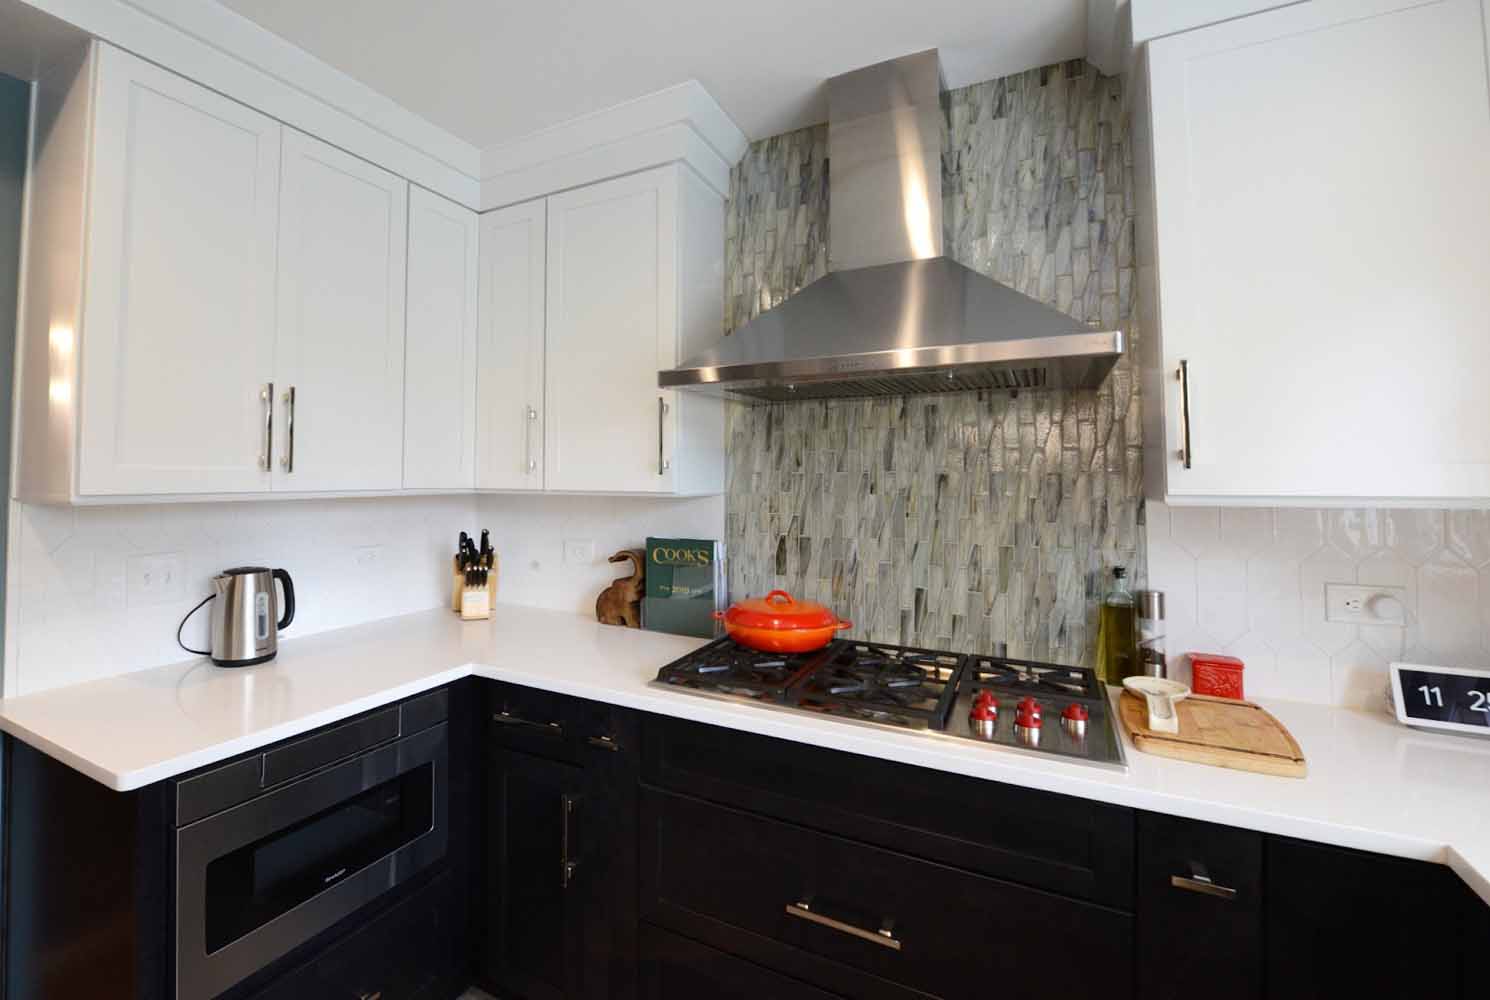 Mix-matched backsplash tiles offer a fun, unique look to this BK Martin home